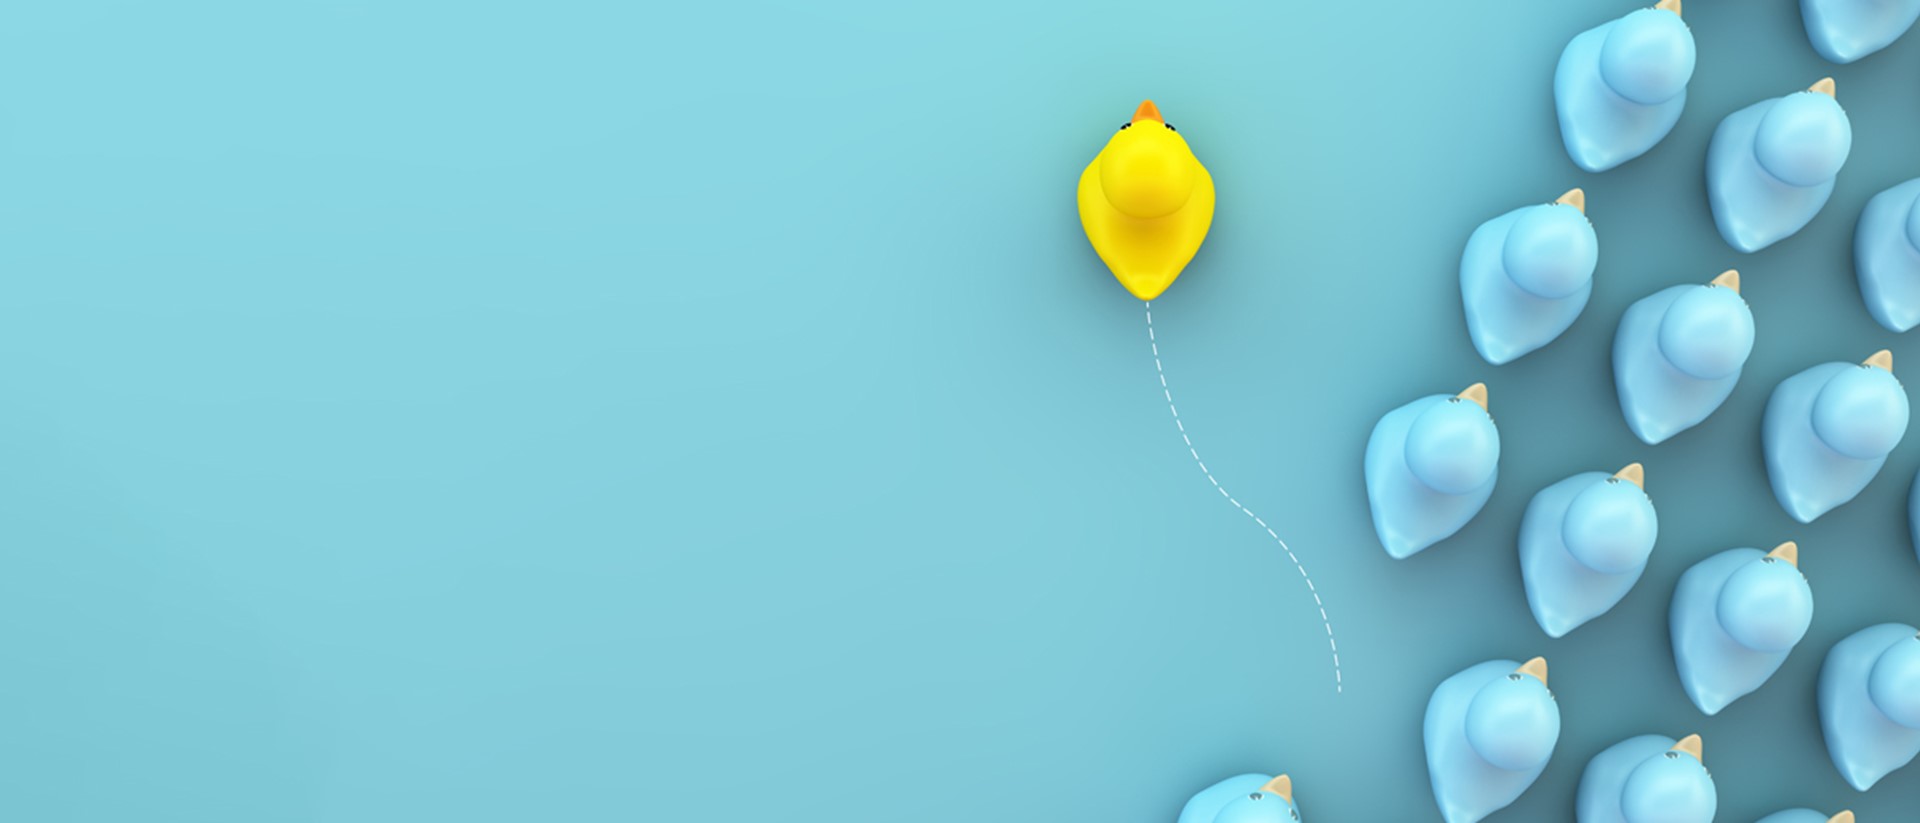 Image of a yellow rubber duck moving away from a pack of blue rubber ducks against a blue background